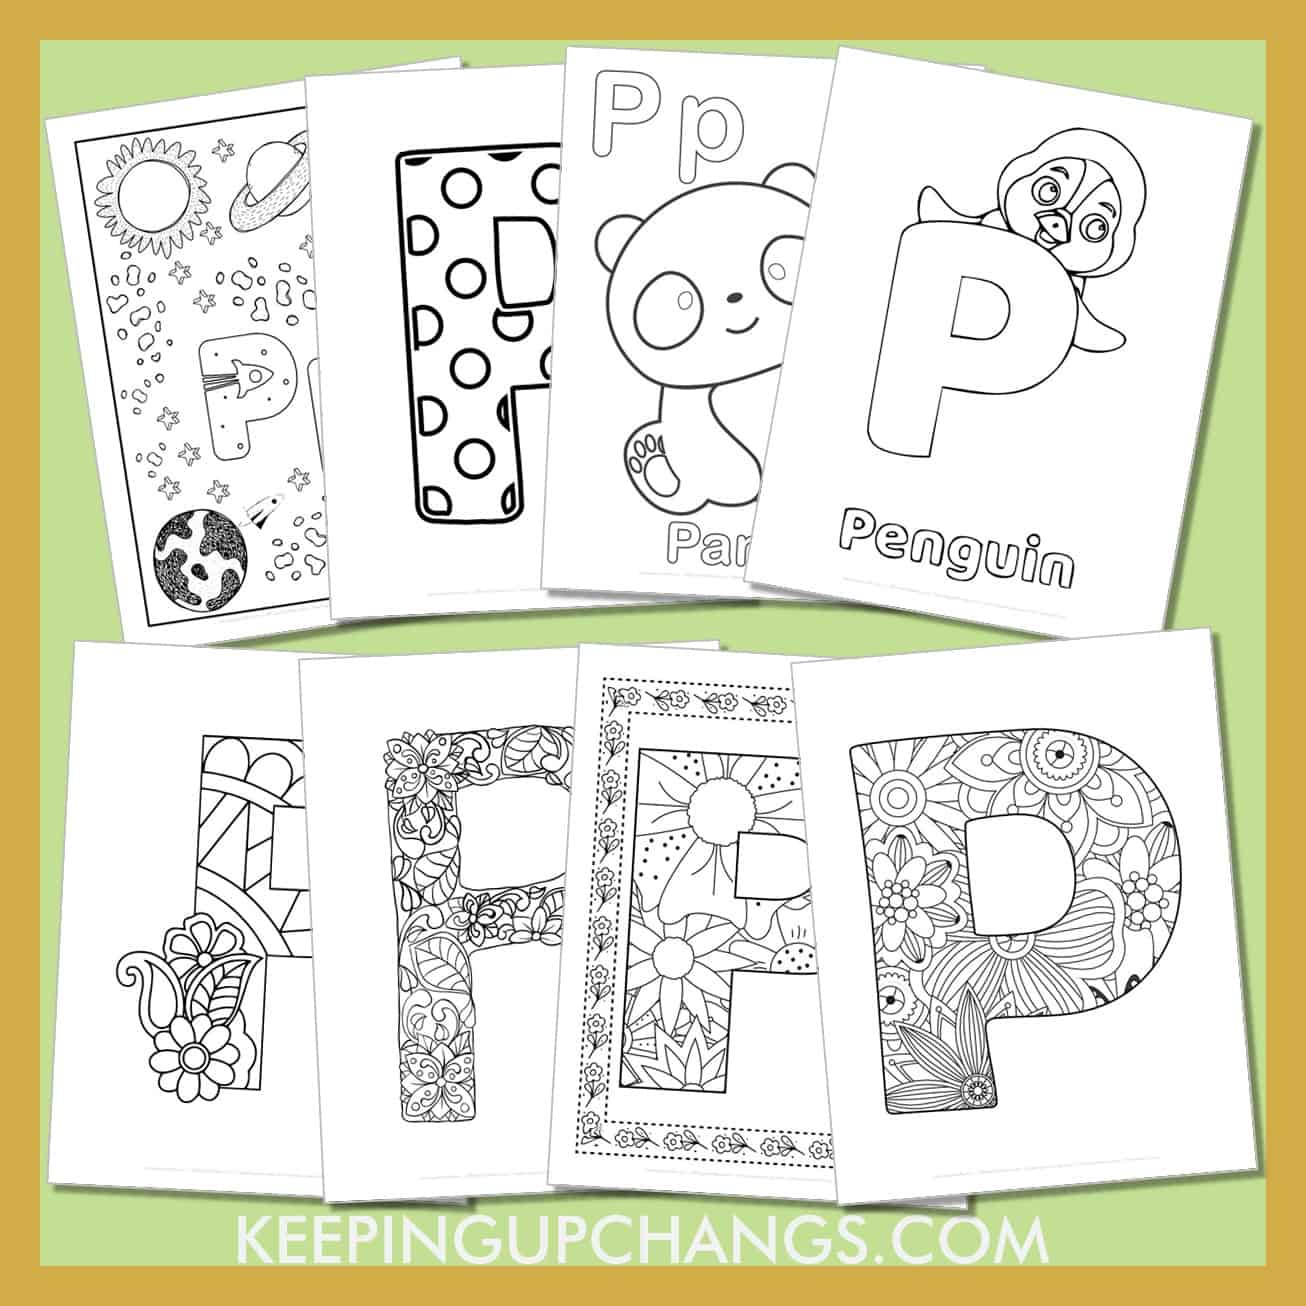 free alphabet letter p to color for toddlers, preschool, kindergarten, to adults.